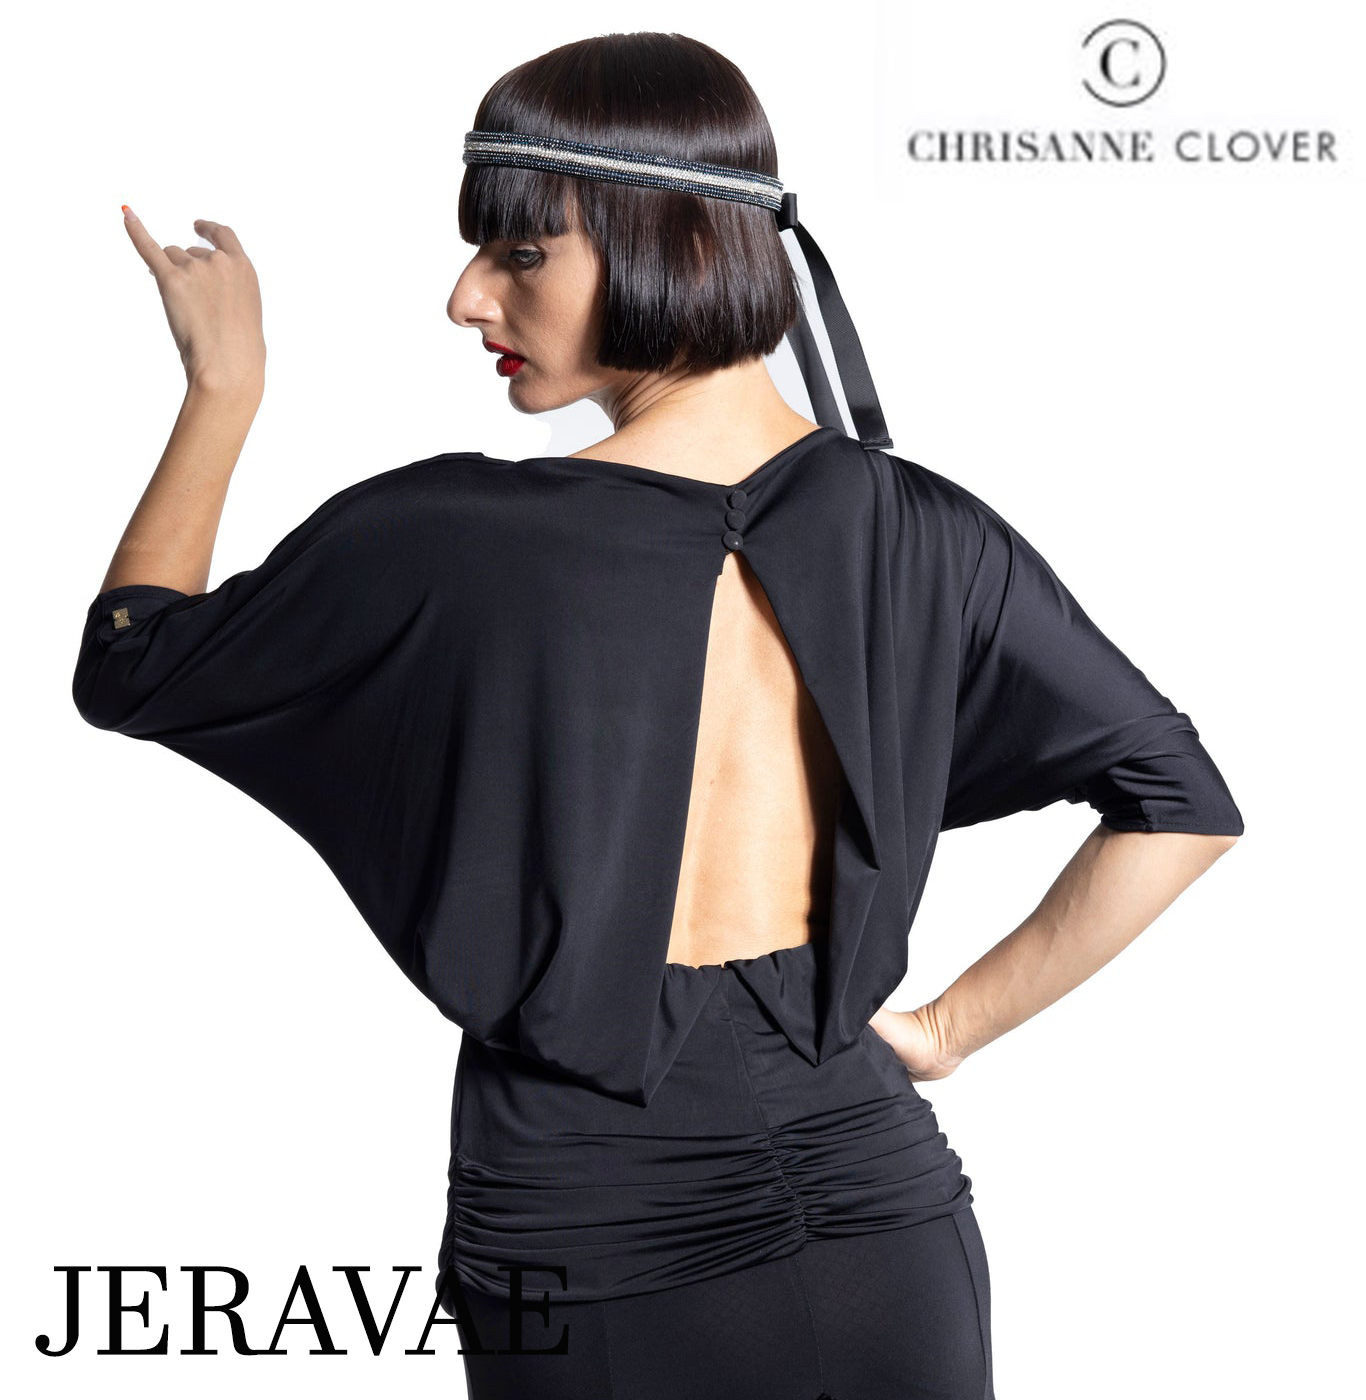 Chrisanne Clover T03 Loose Fitting Black Practice Top with Dolman Sleeves, Rouched Bottom, and Open Back PRA 926 in Stock